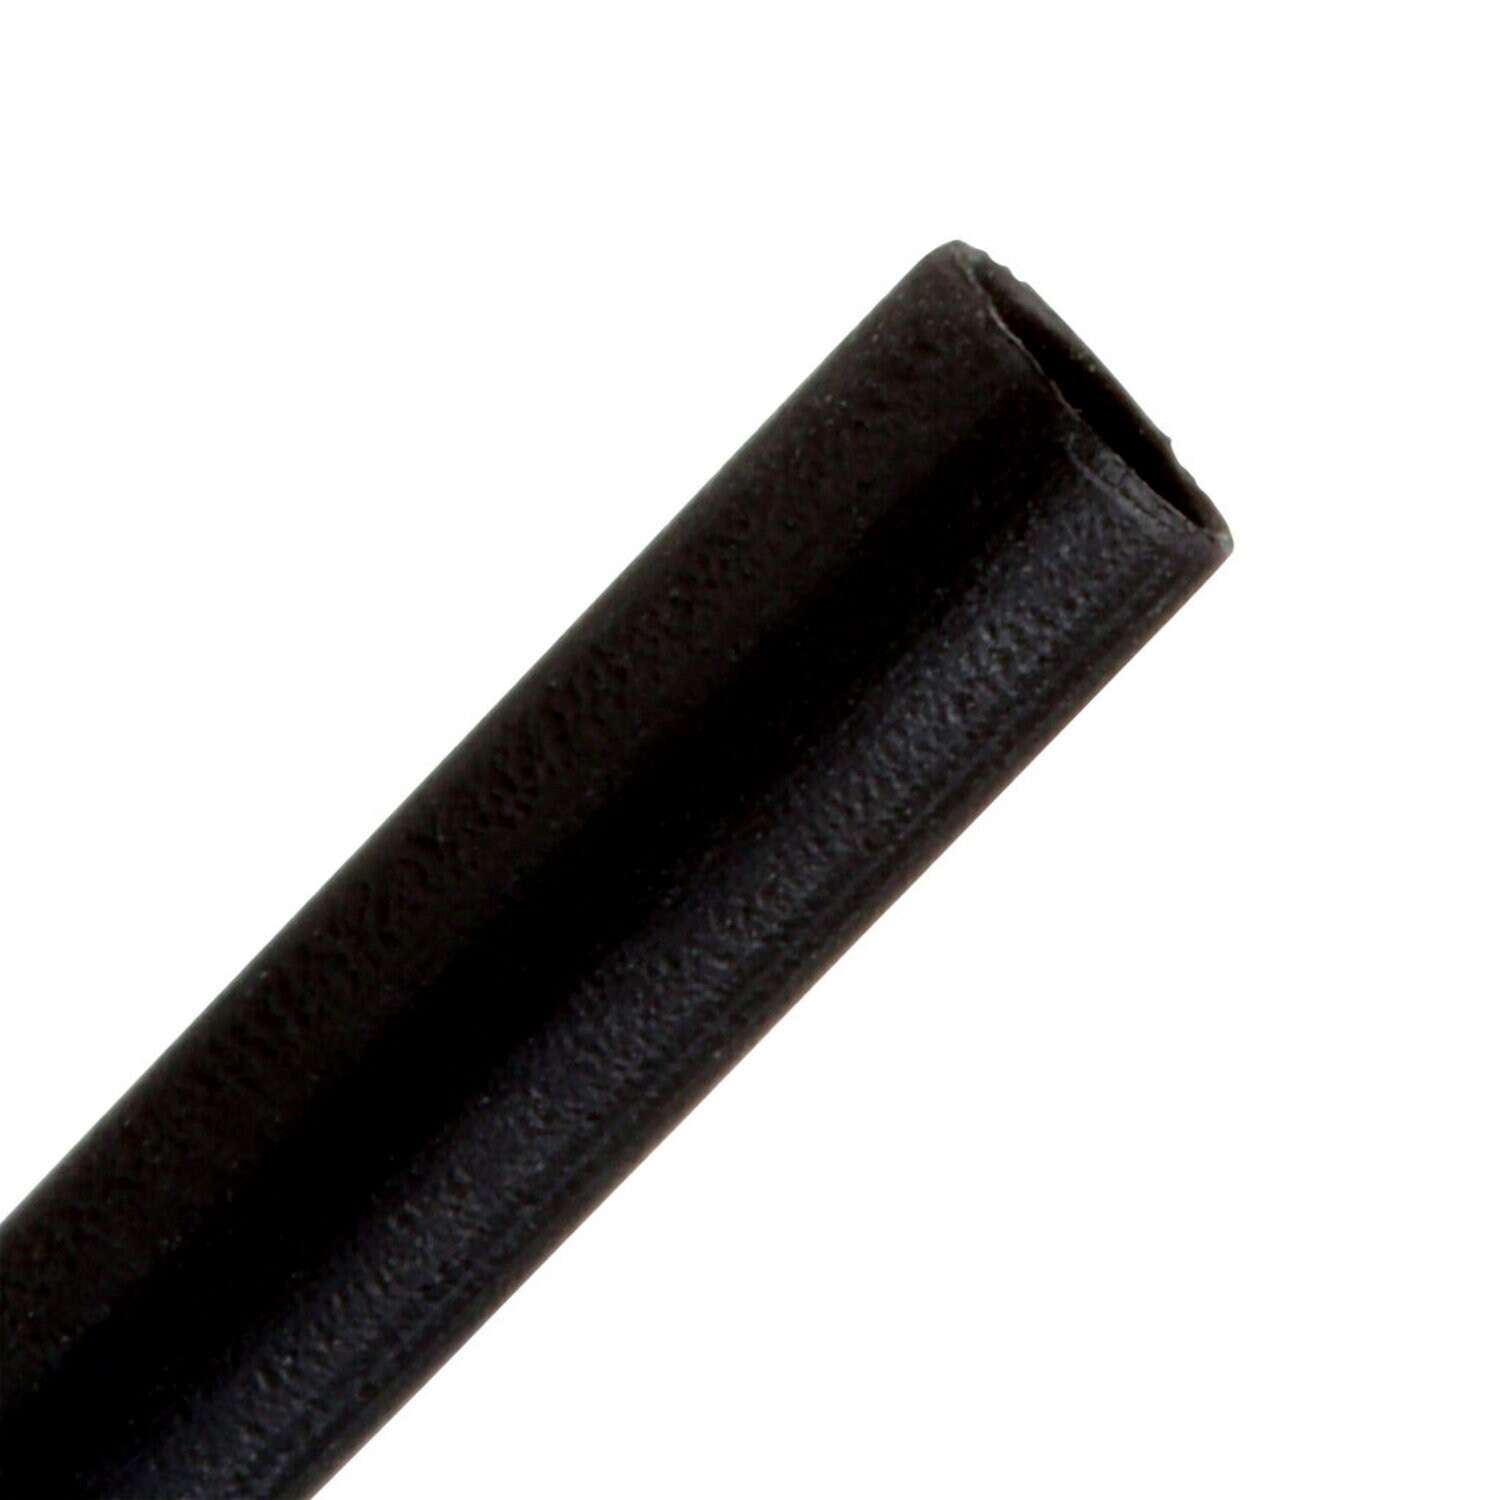 7000133636 - 3M Heat Shrink Thin-Wall Tubing FP-301-3/32-48"-Black-25 Pcs, 48 in
Length sticks, 25 pieces/case